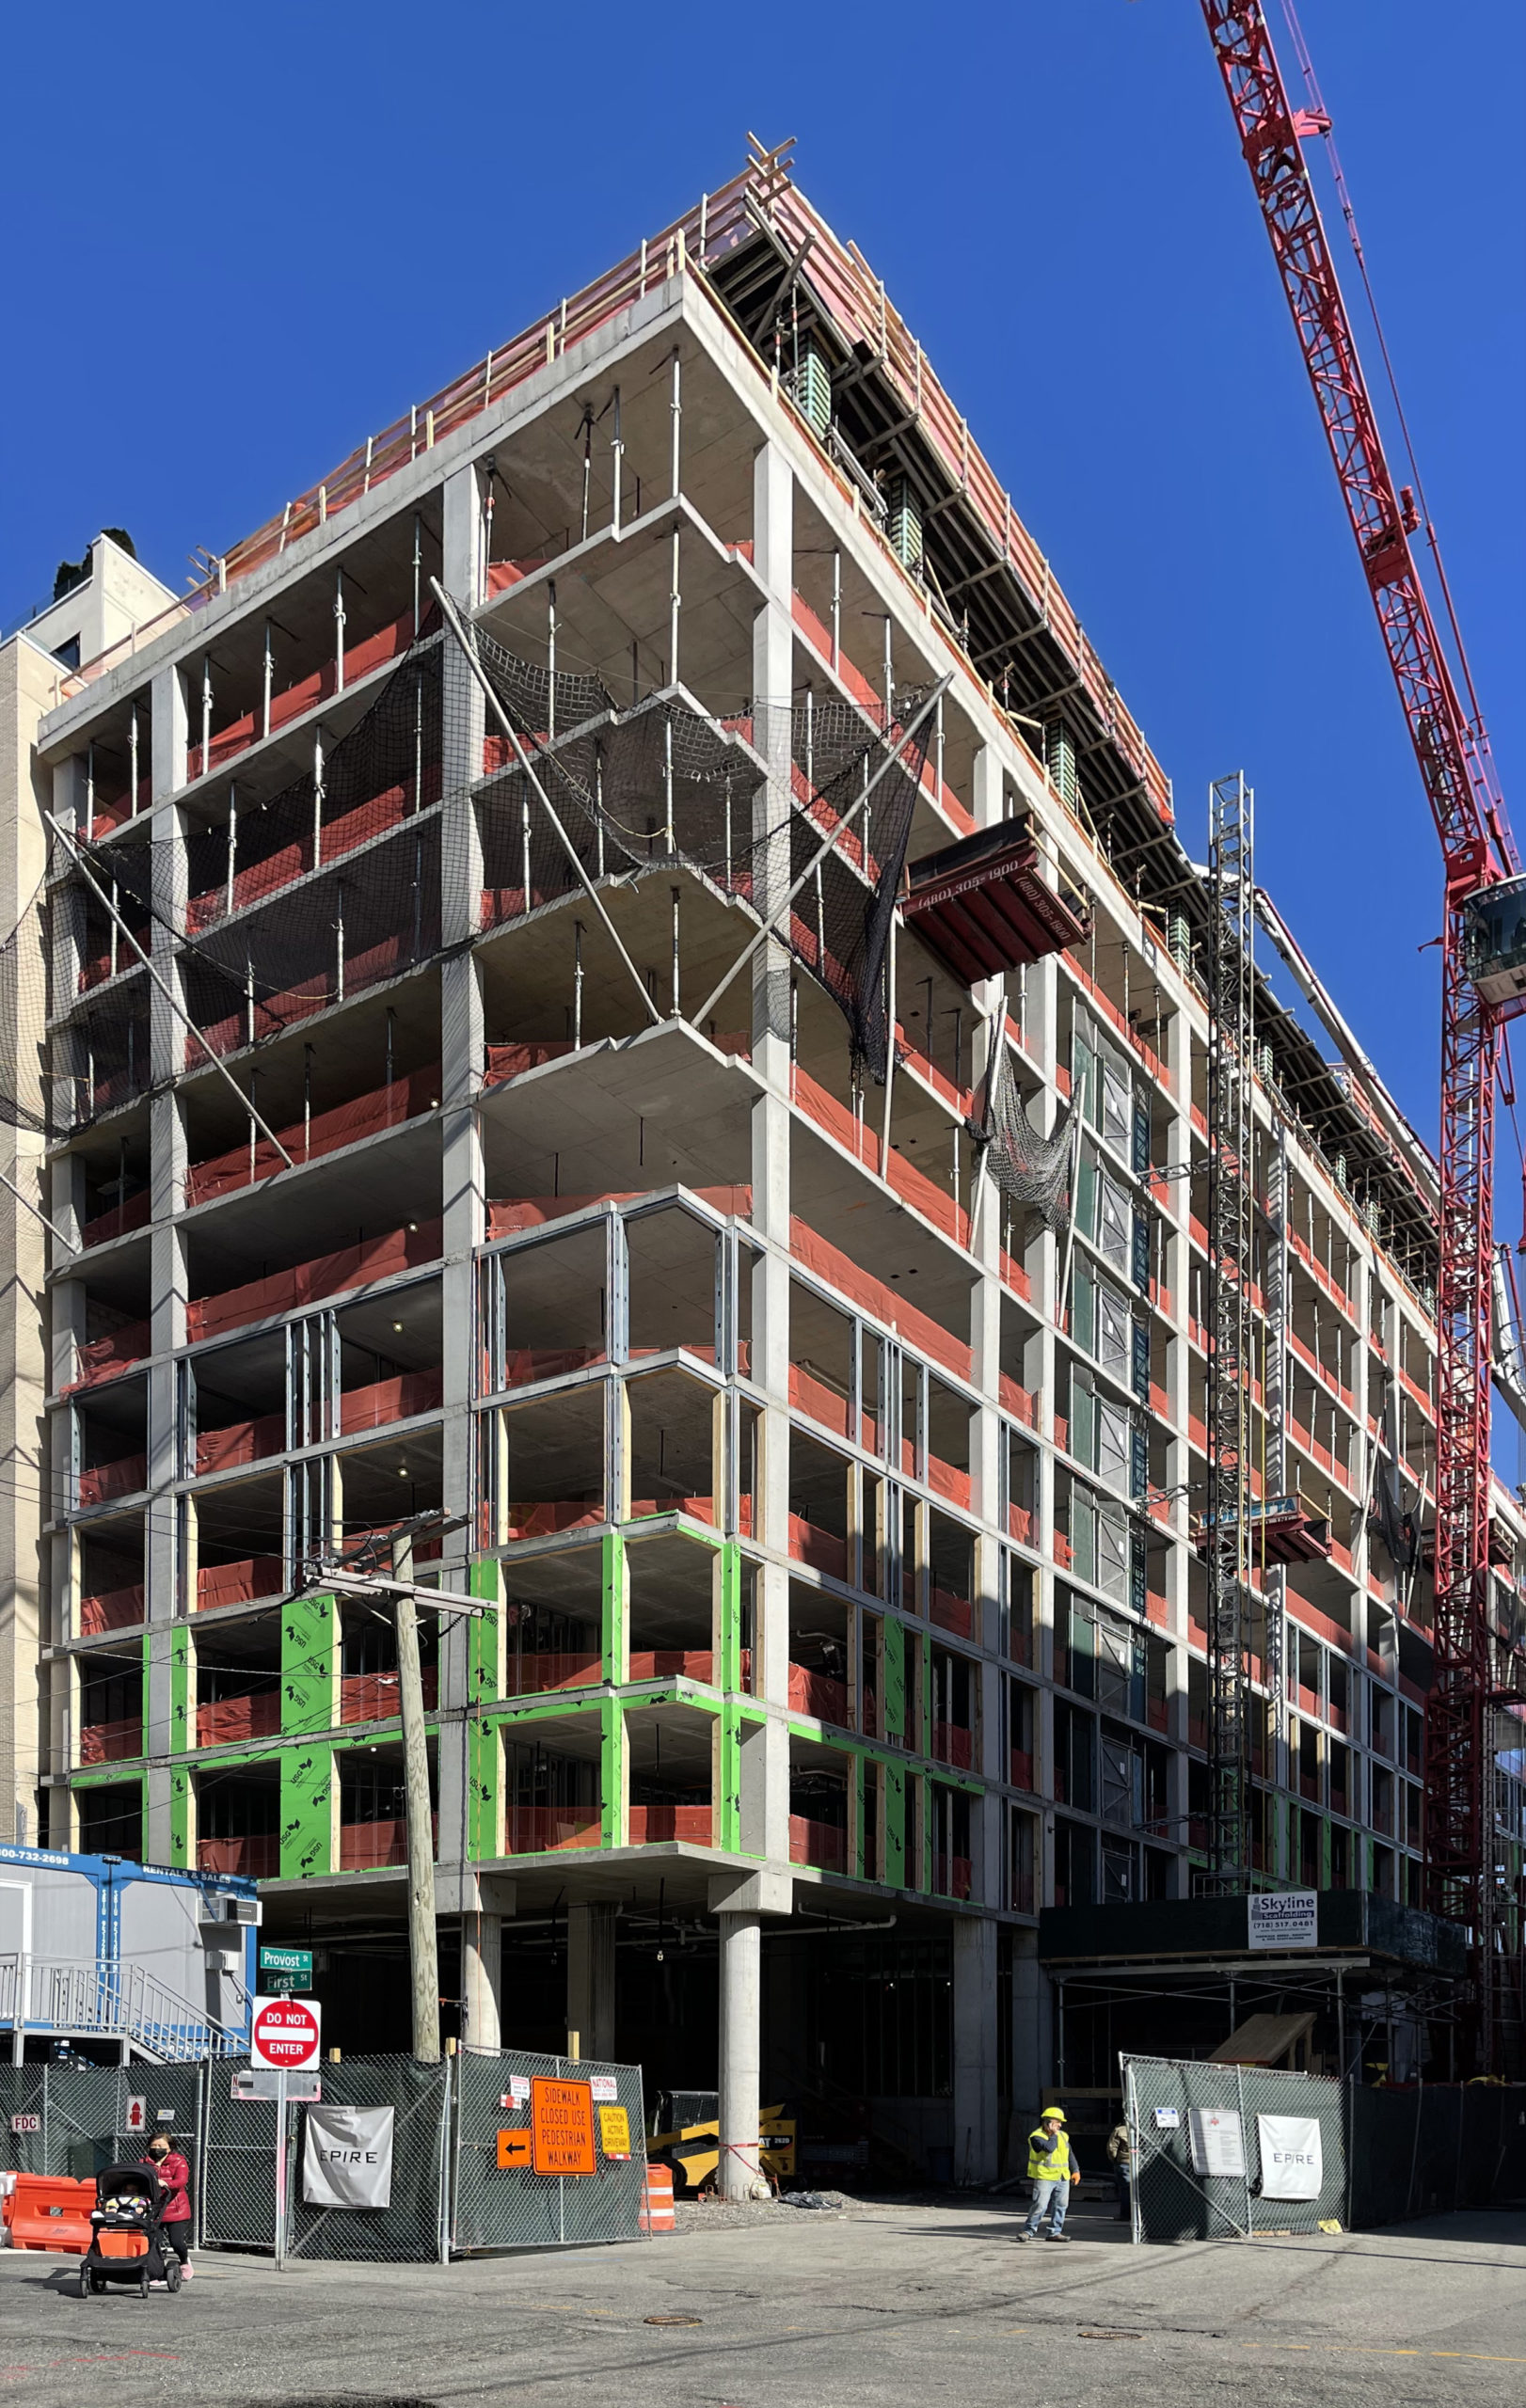 144 First Street Reaches 12-Story Pinnacle in Jersey City, New Jersey - New York YIMBY